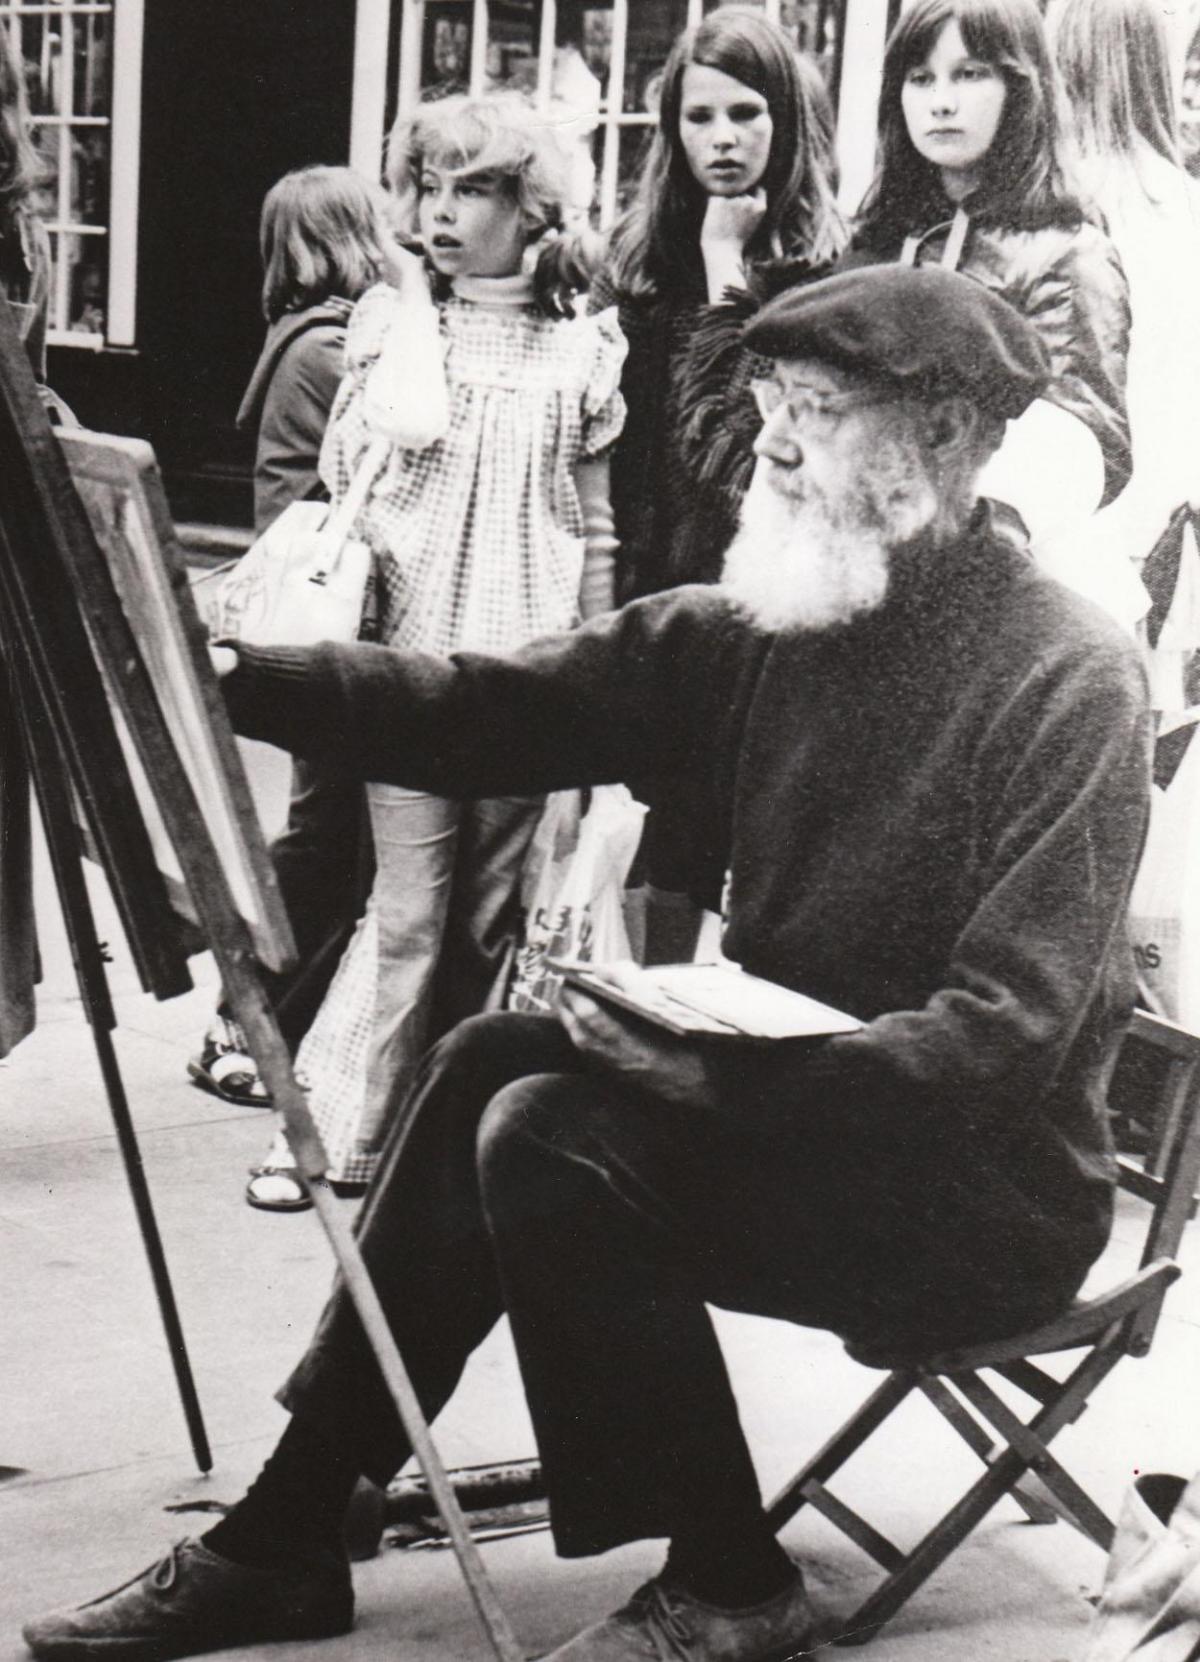 In 1976, 74-year-old artist Robert Russell, who had a studio in Swanage High Street often drew an audience from curious passers-by.